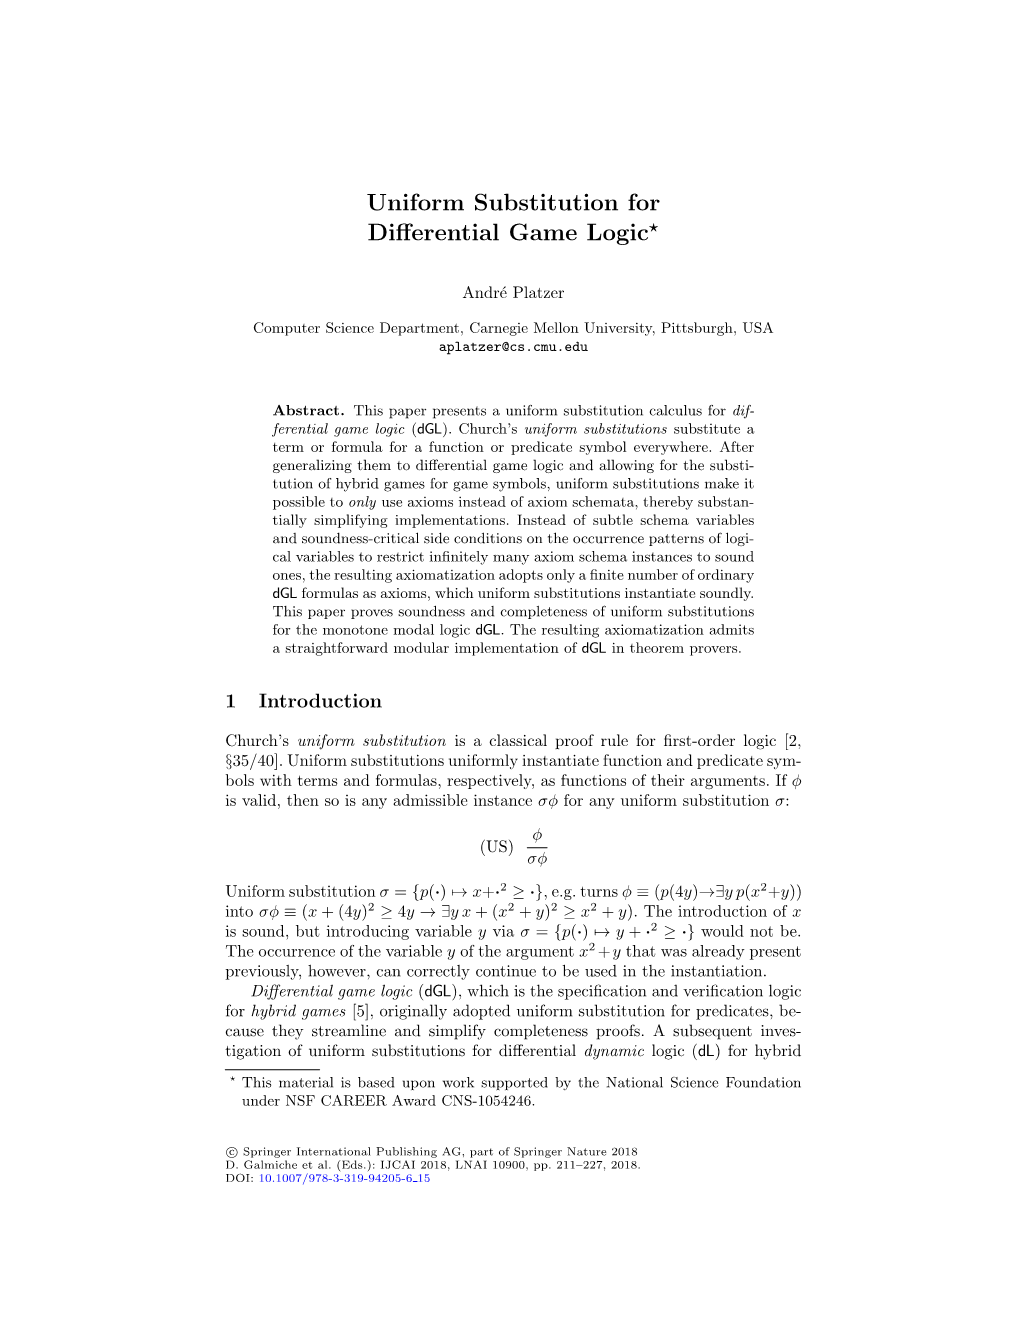 Uniform Substitution for Differential Game Logic